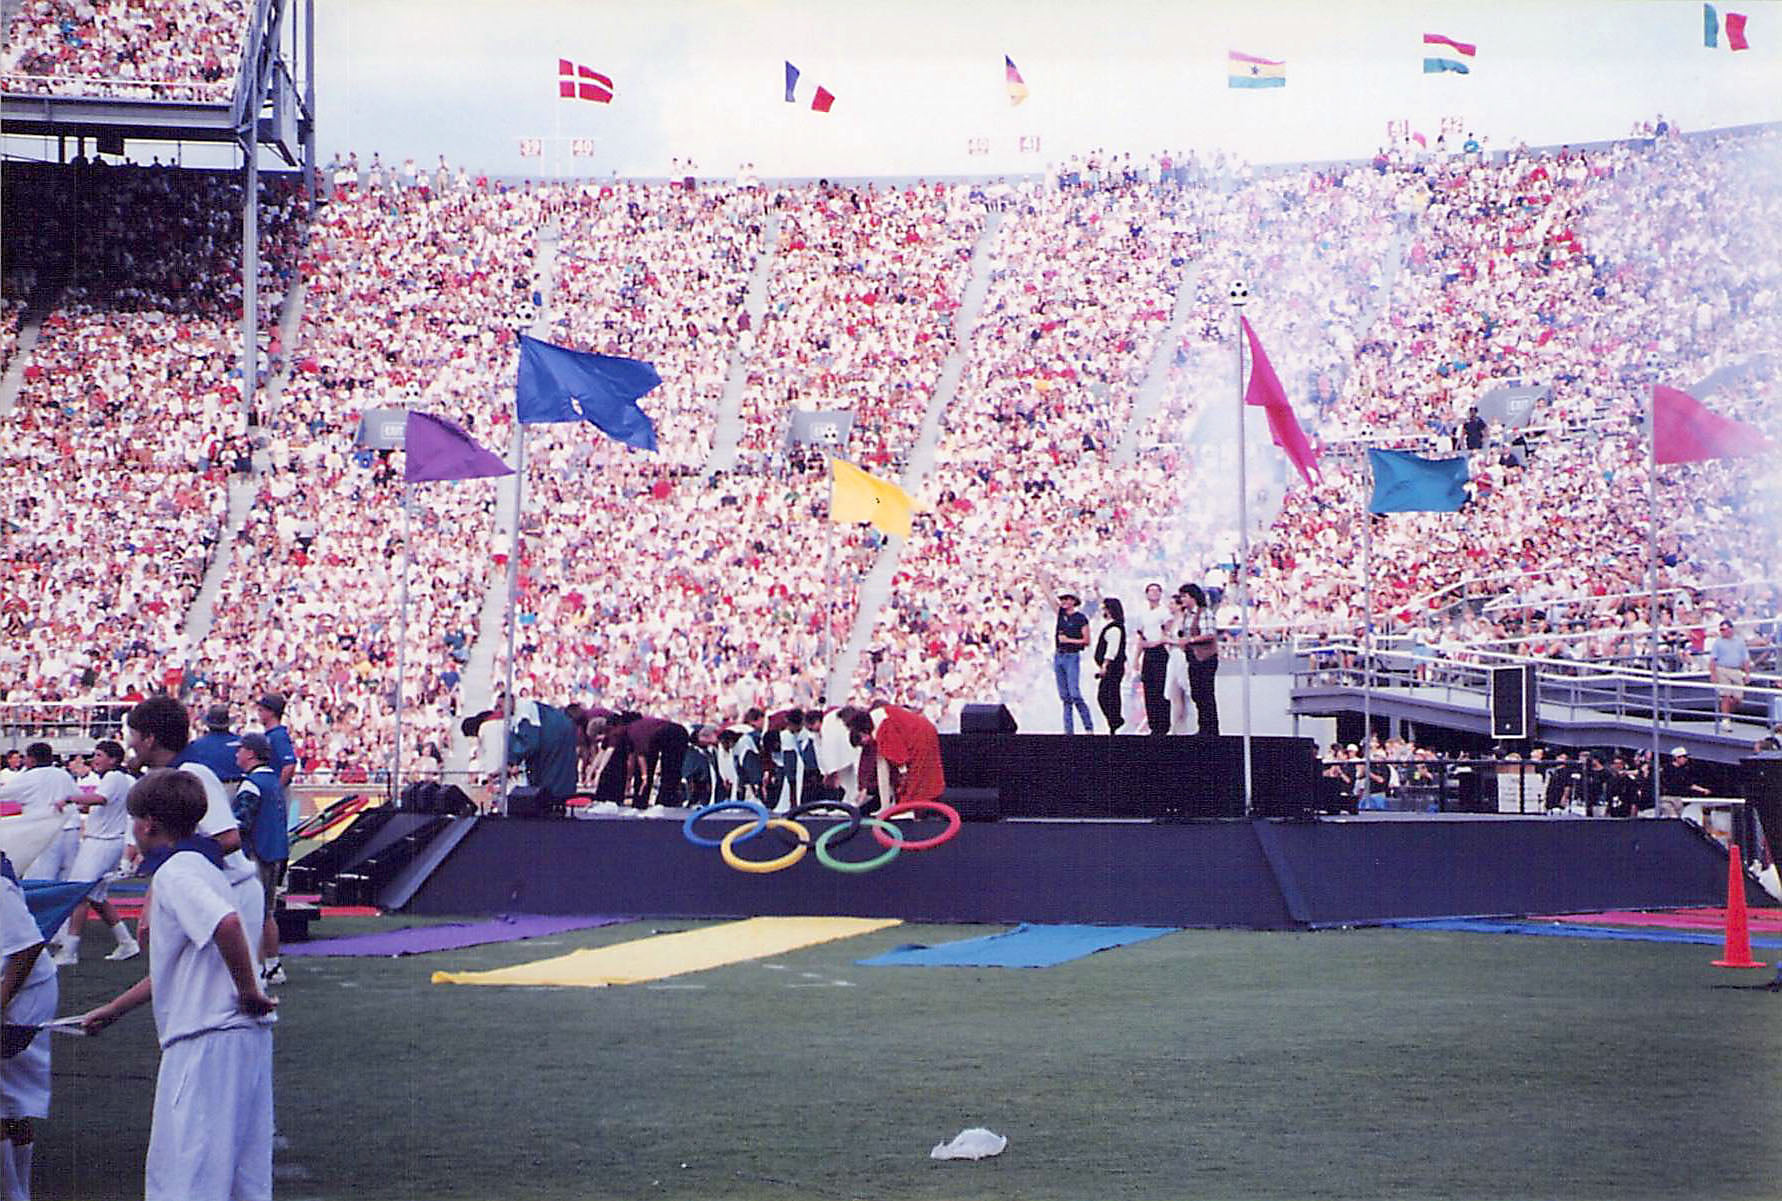 Birmingham remembers hosting soccer for the 1996 Olympics